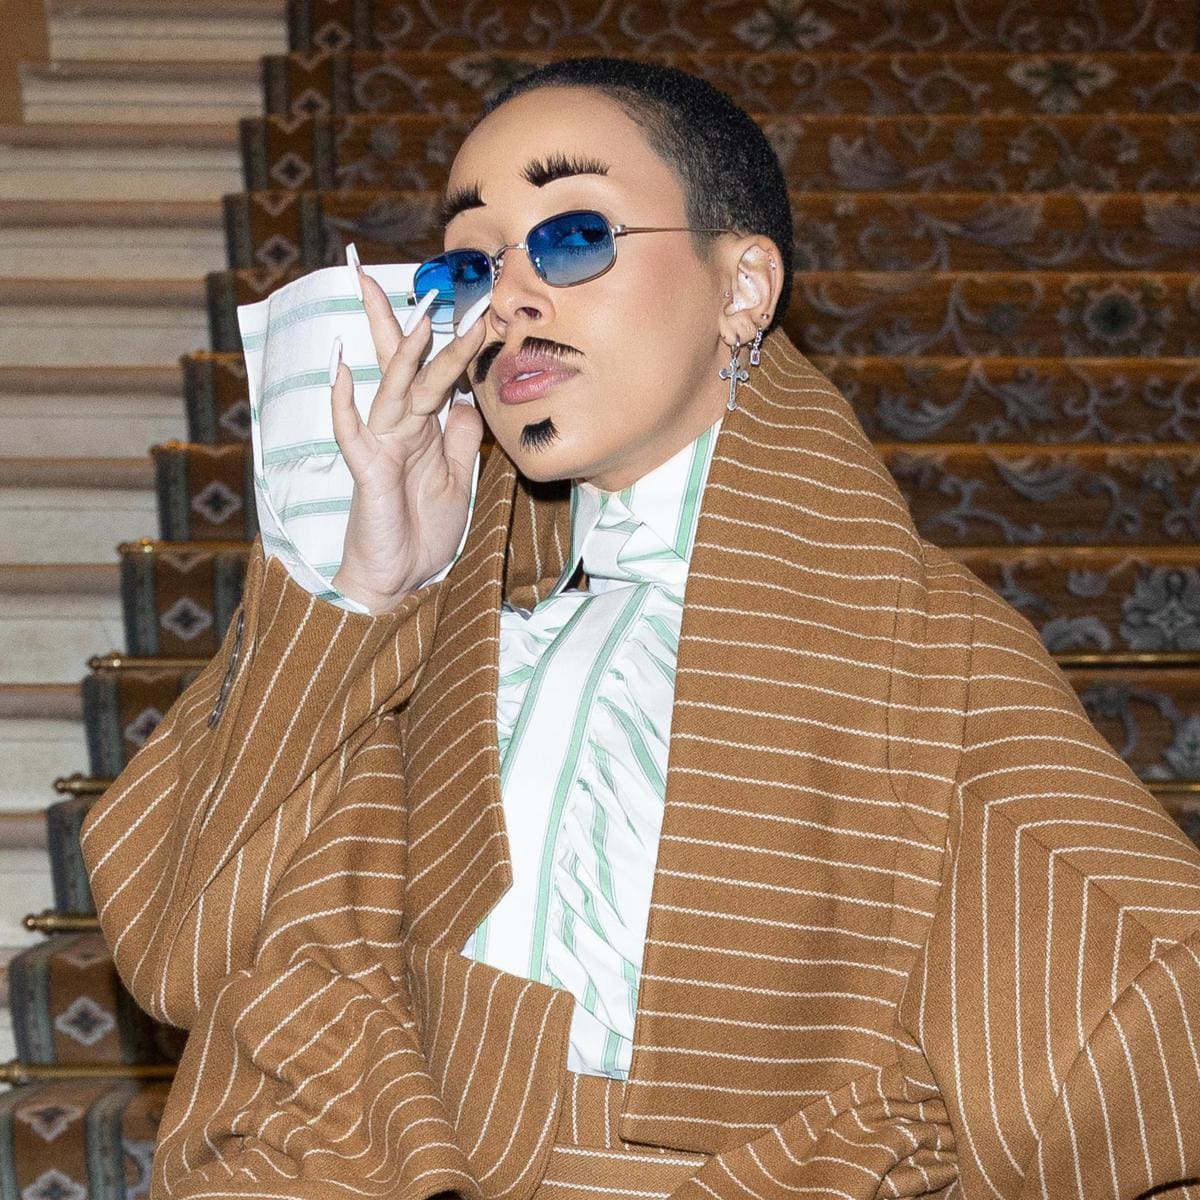 Doja Cat’s incredible looks at Paris Fashion Week: Including her $20K bedazzled tequila purse